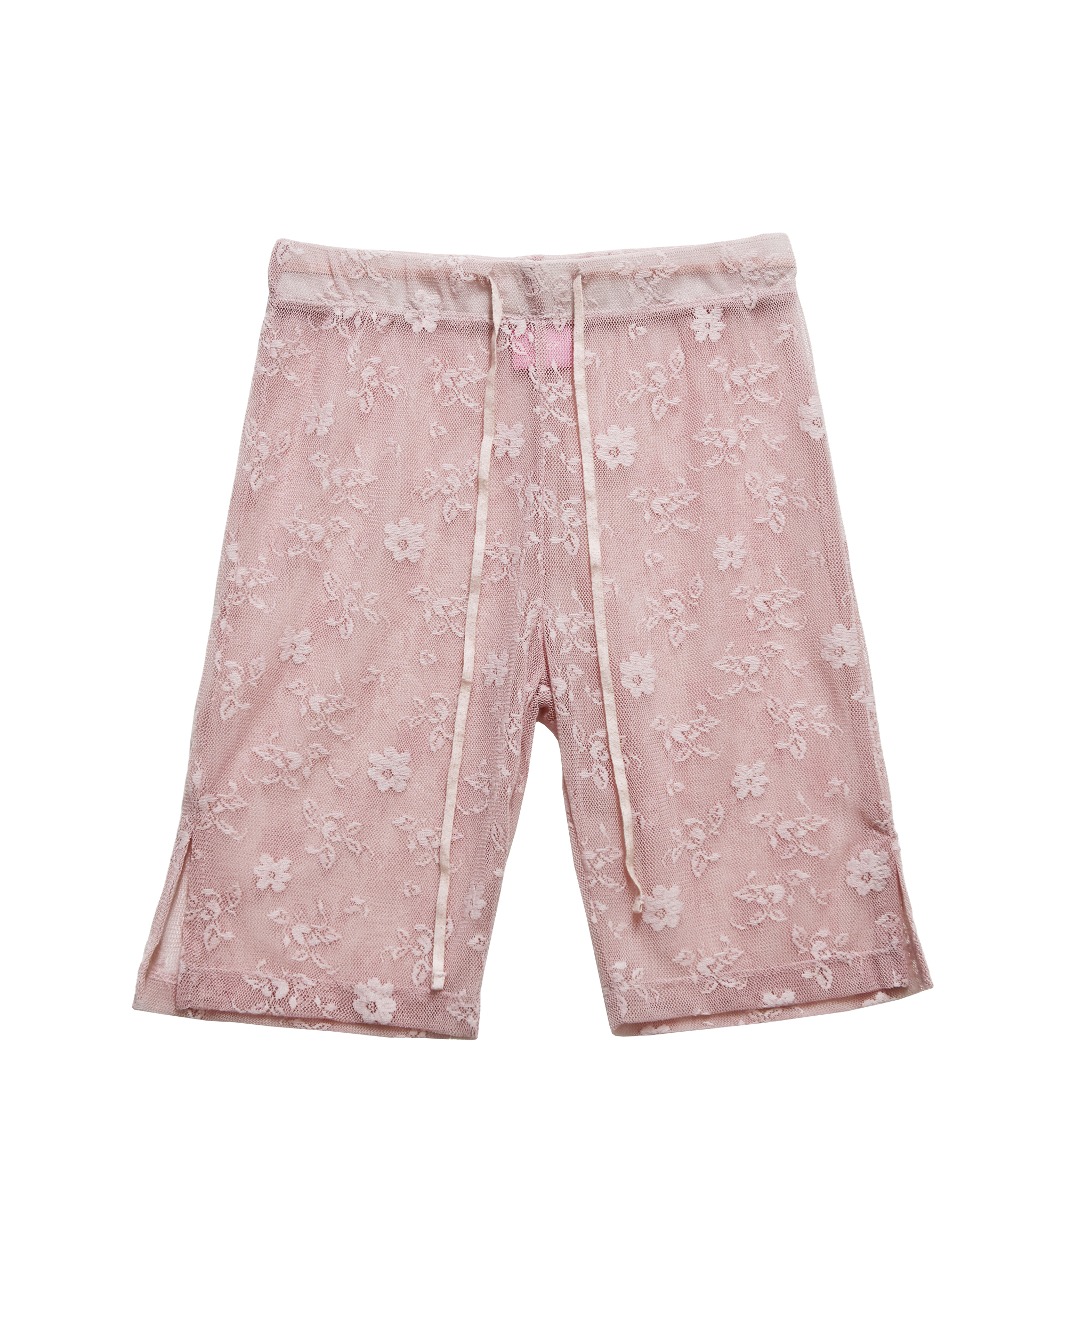 Lace String Shorts (Pink)